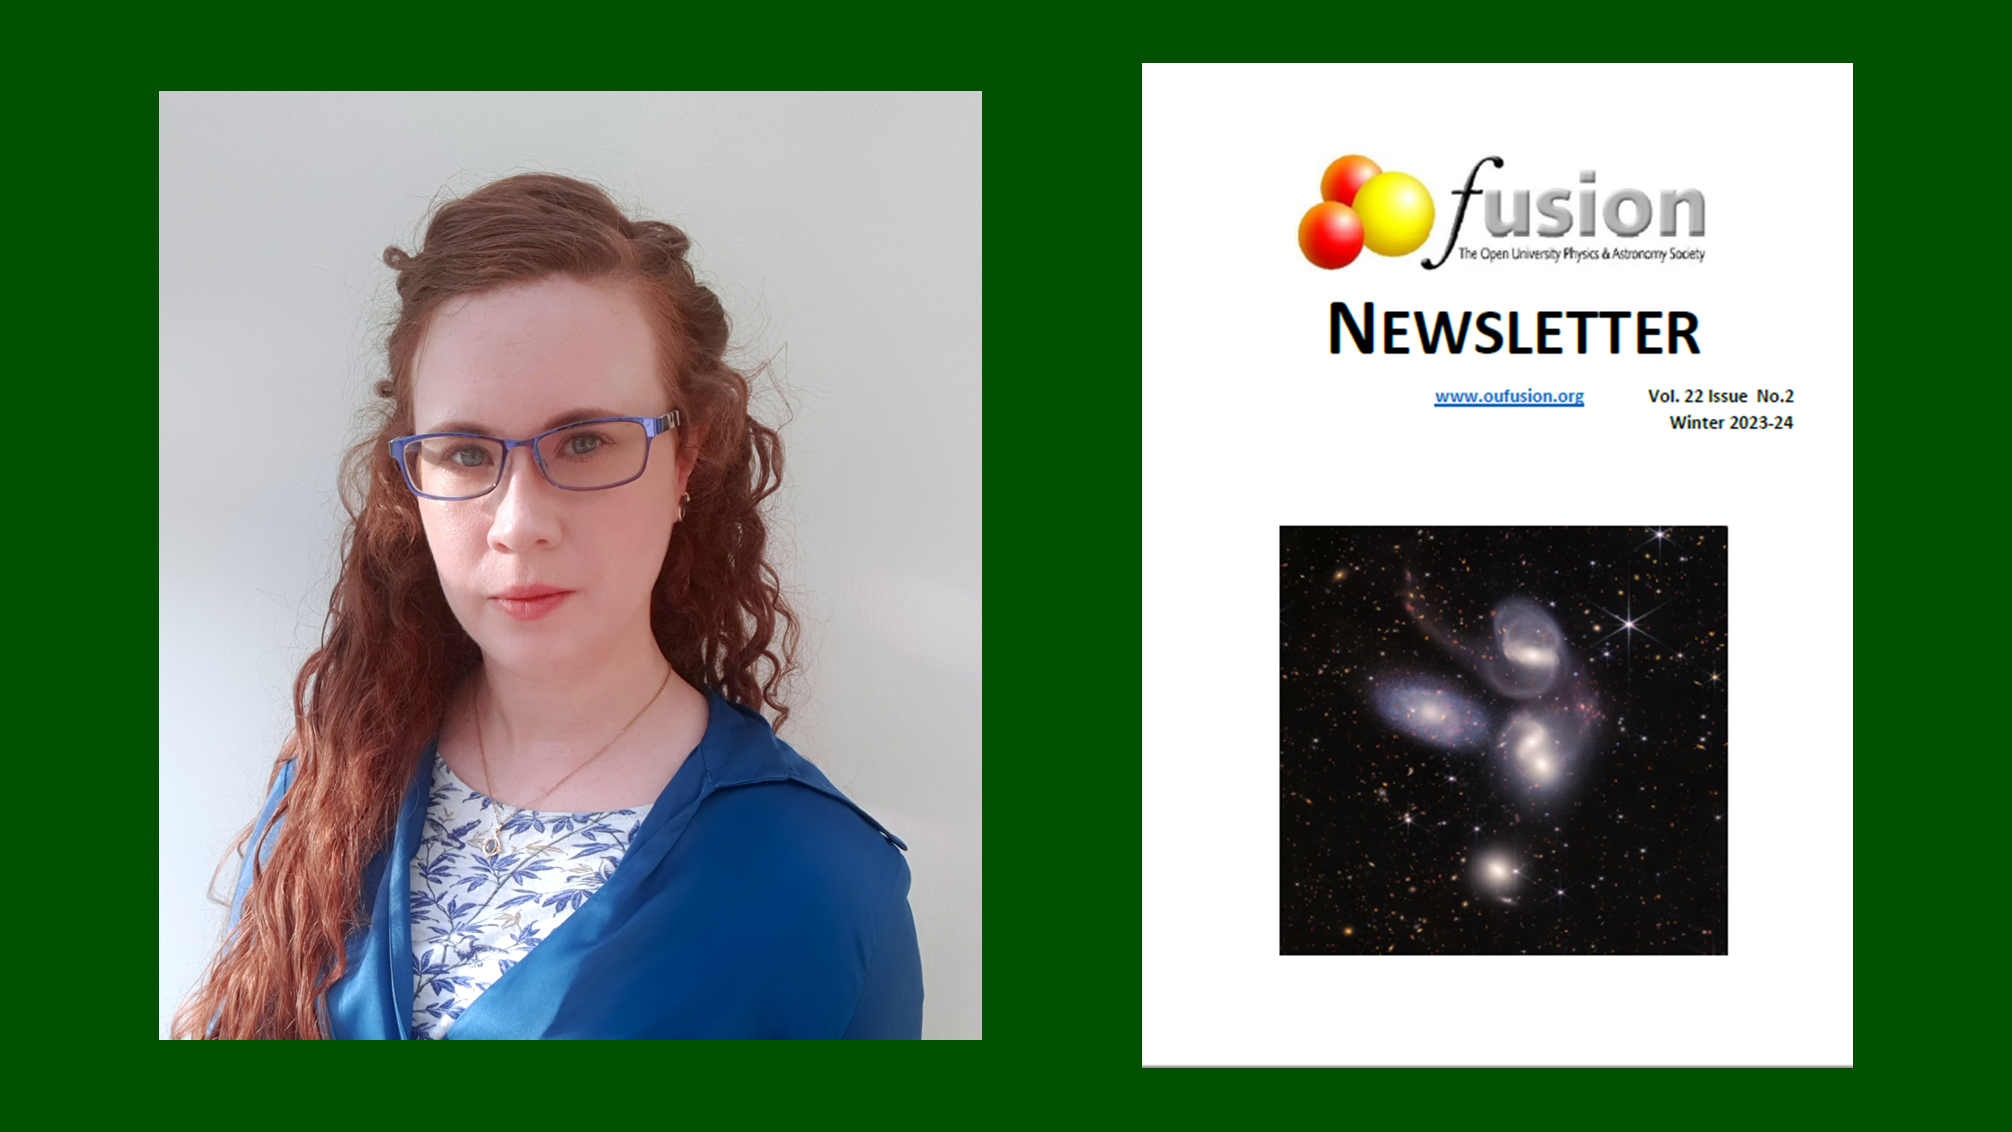 Dr Laura Pickard in The Open University Physics & Astronomy Society's Fusion Newsletter Vol. 22, Issue No. 2 Winter 2023-24